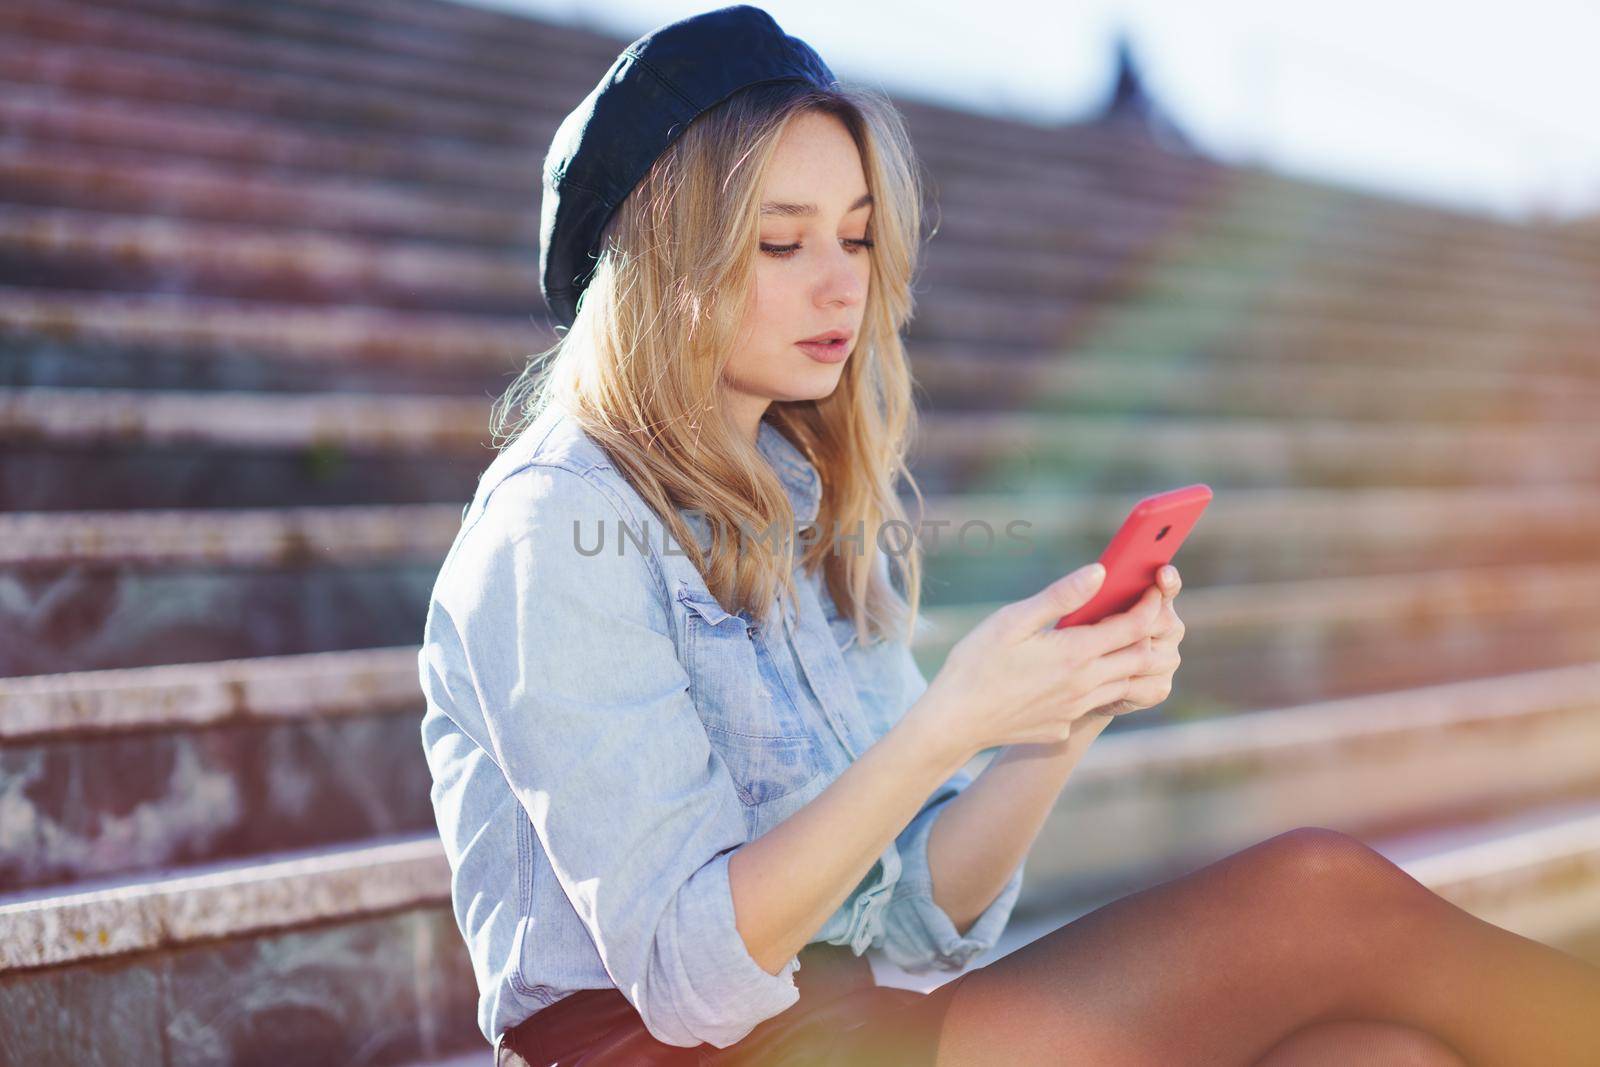 Blonde woman using her smartphone sitting on some city steps, wearing a denim shirt and black beret.